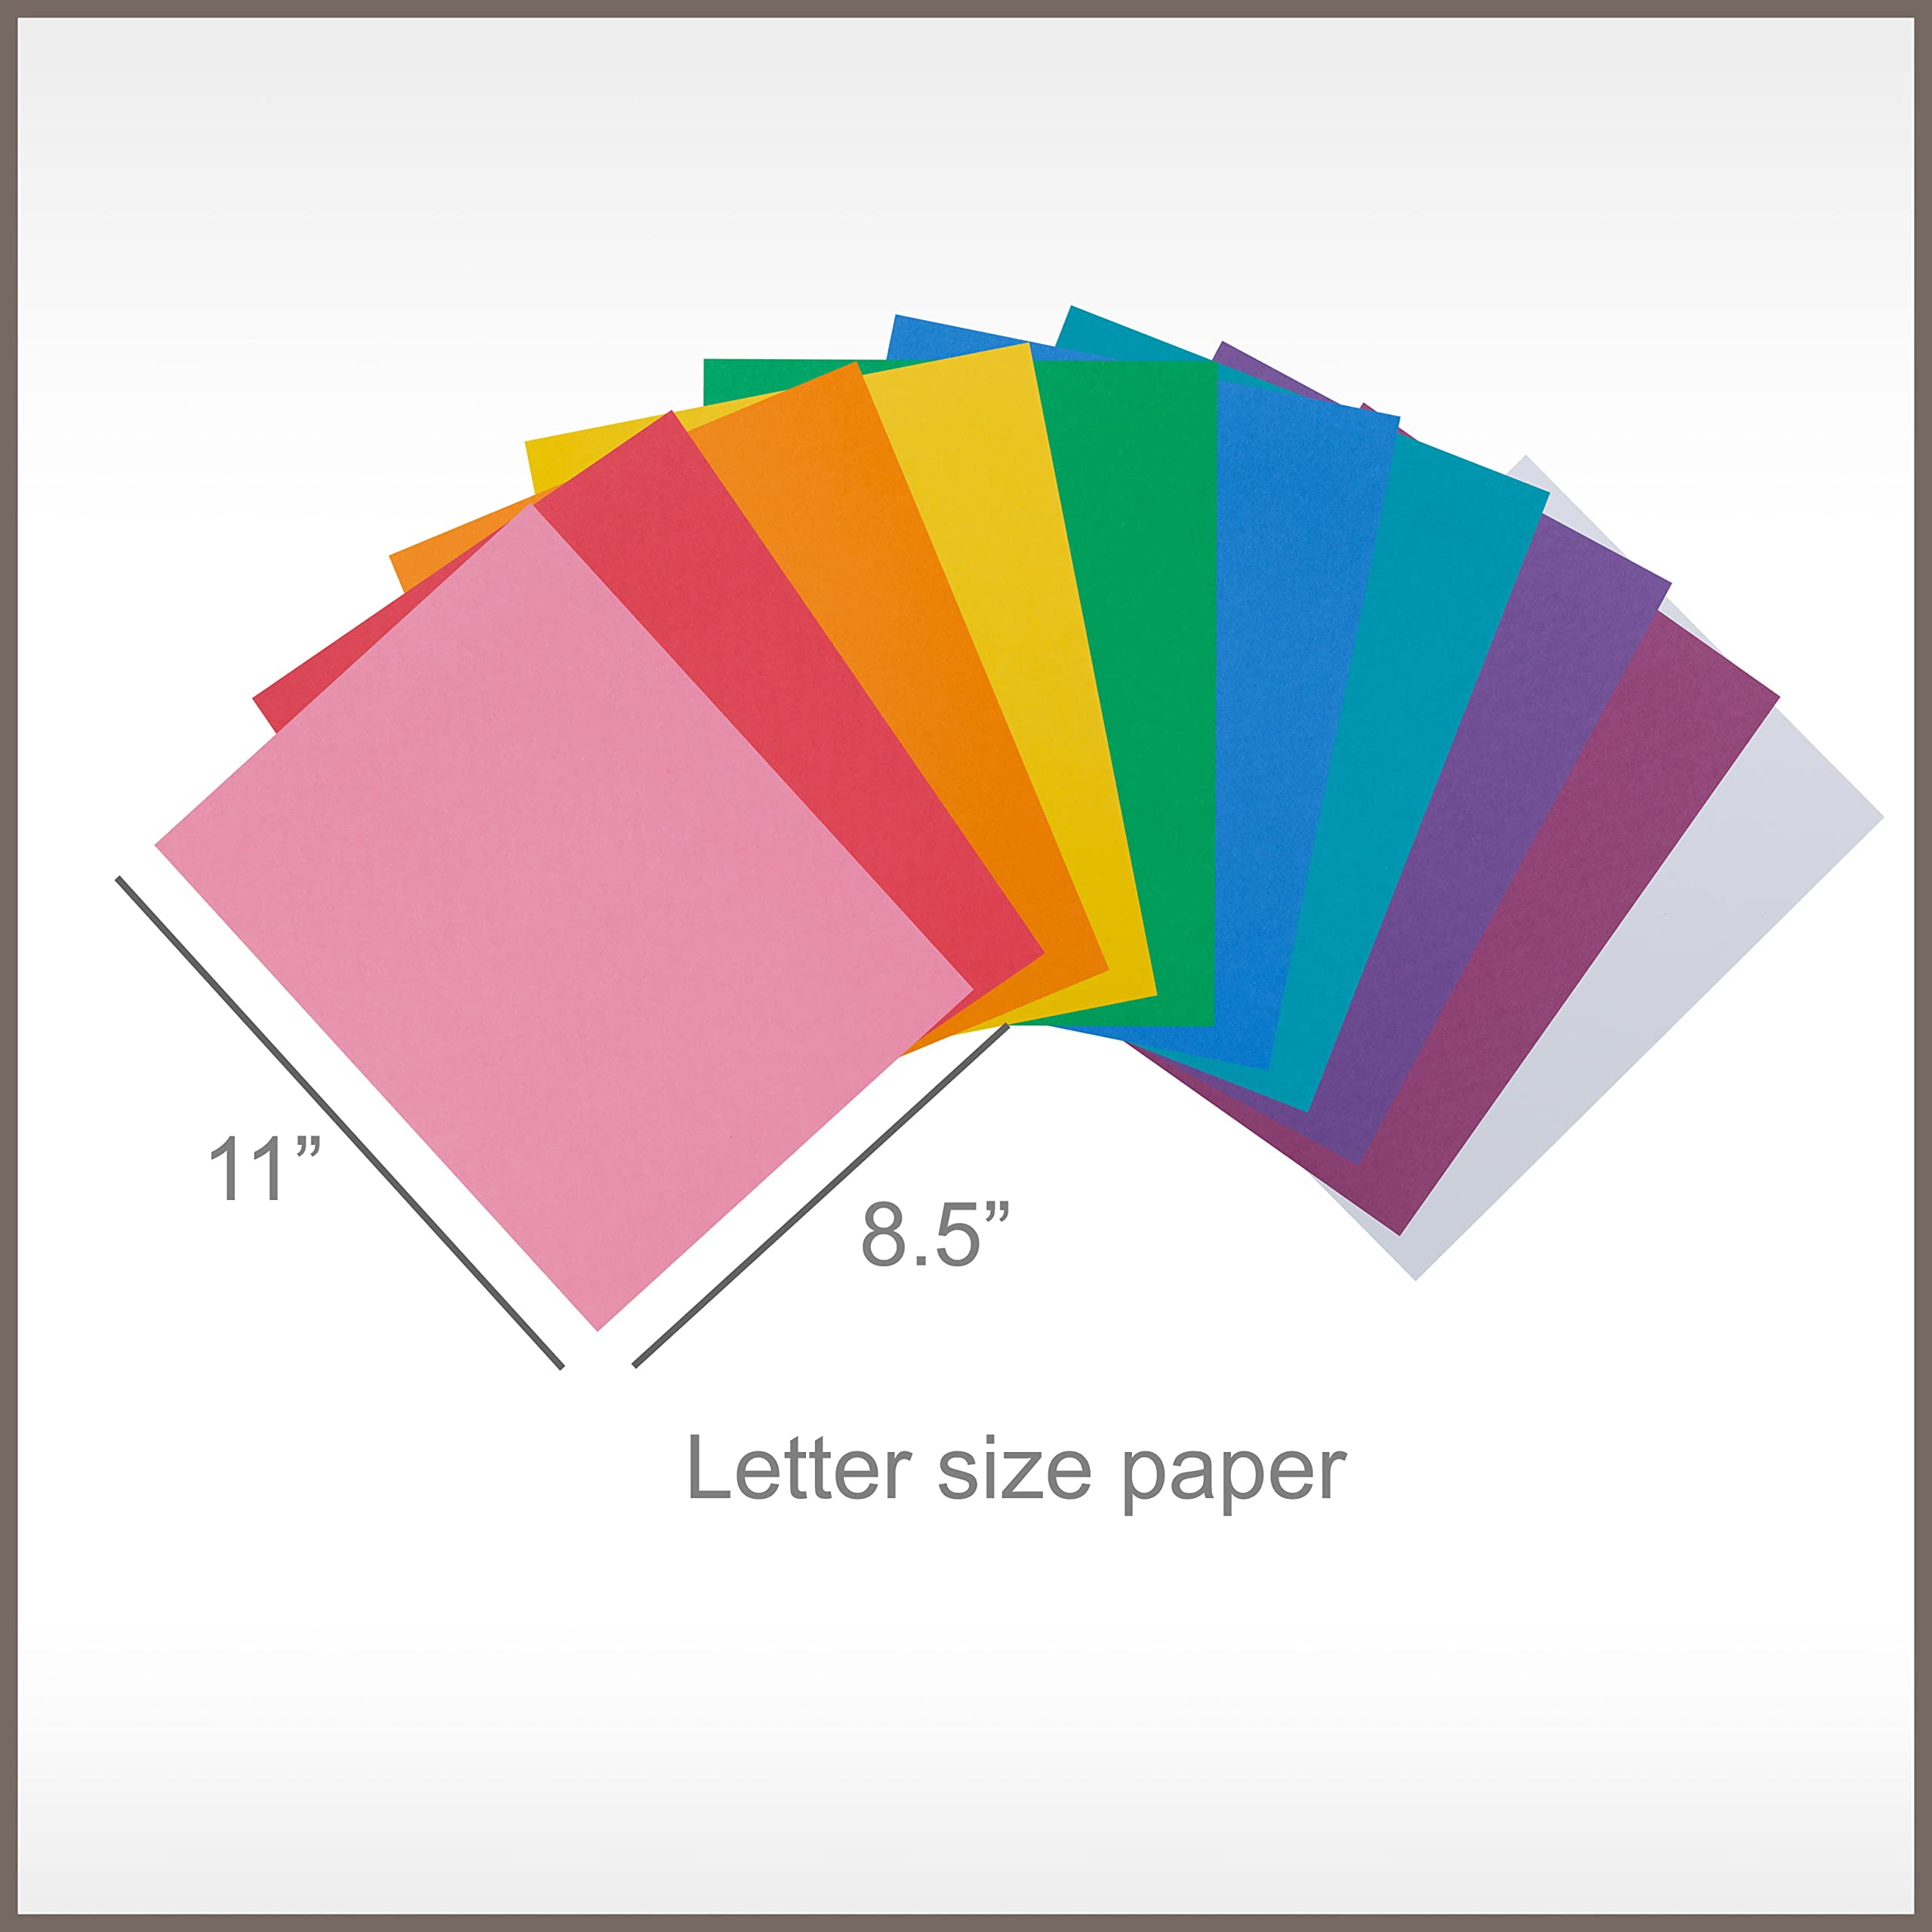 12x12 Cardstock Paper Pack - 110 lb Assorted Pastel Colored Scrapbook Paper  - Double Sided Card Stock for Crafts, Embossing, Cardmaking - 40 Sheets